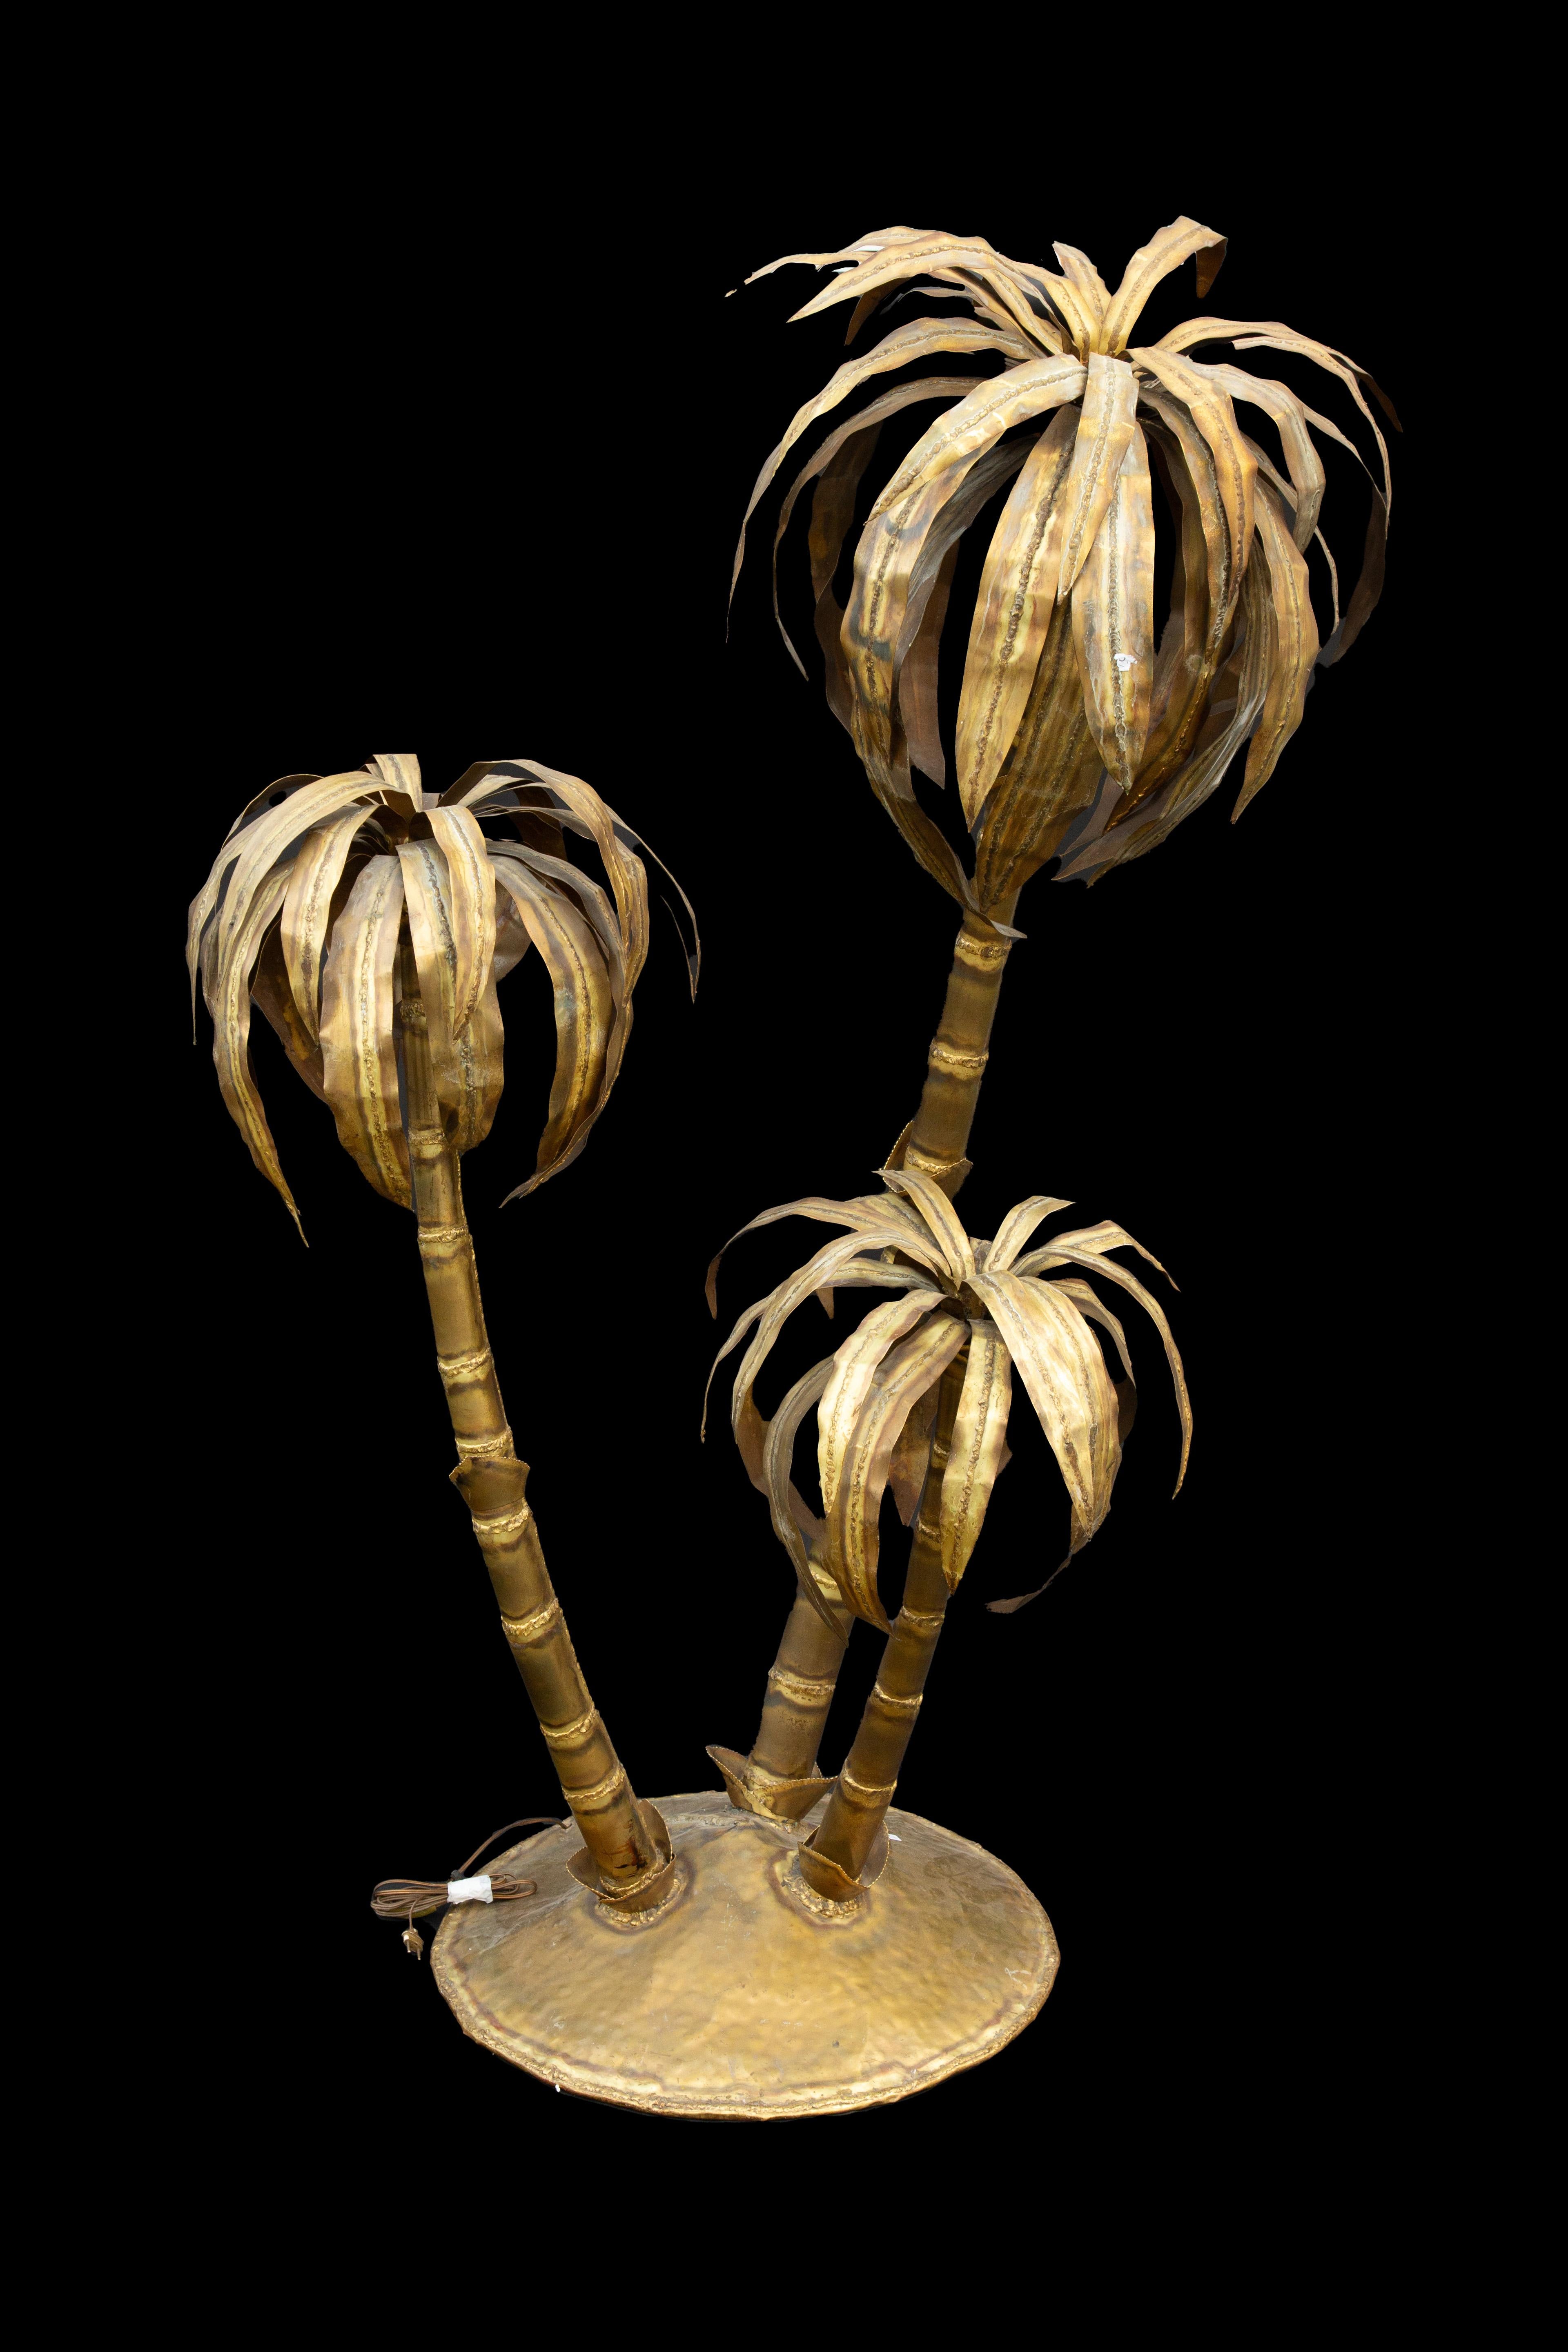 In the style reminiscent of Maison Jansen from the 20th century, this impressive lamp showcases three brass palm trees standing tall and independent. With a height of 77 inches the lamp commands attention and radiates an air of grandeur. Each palm